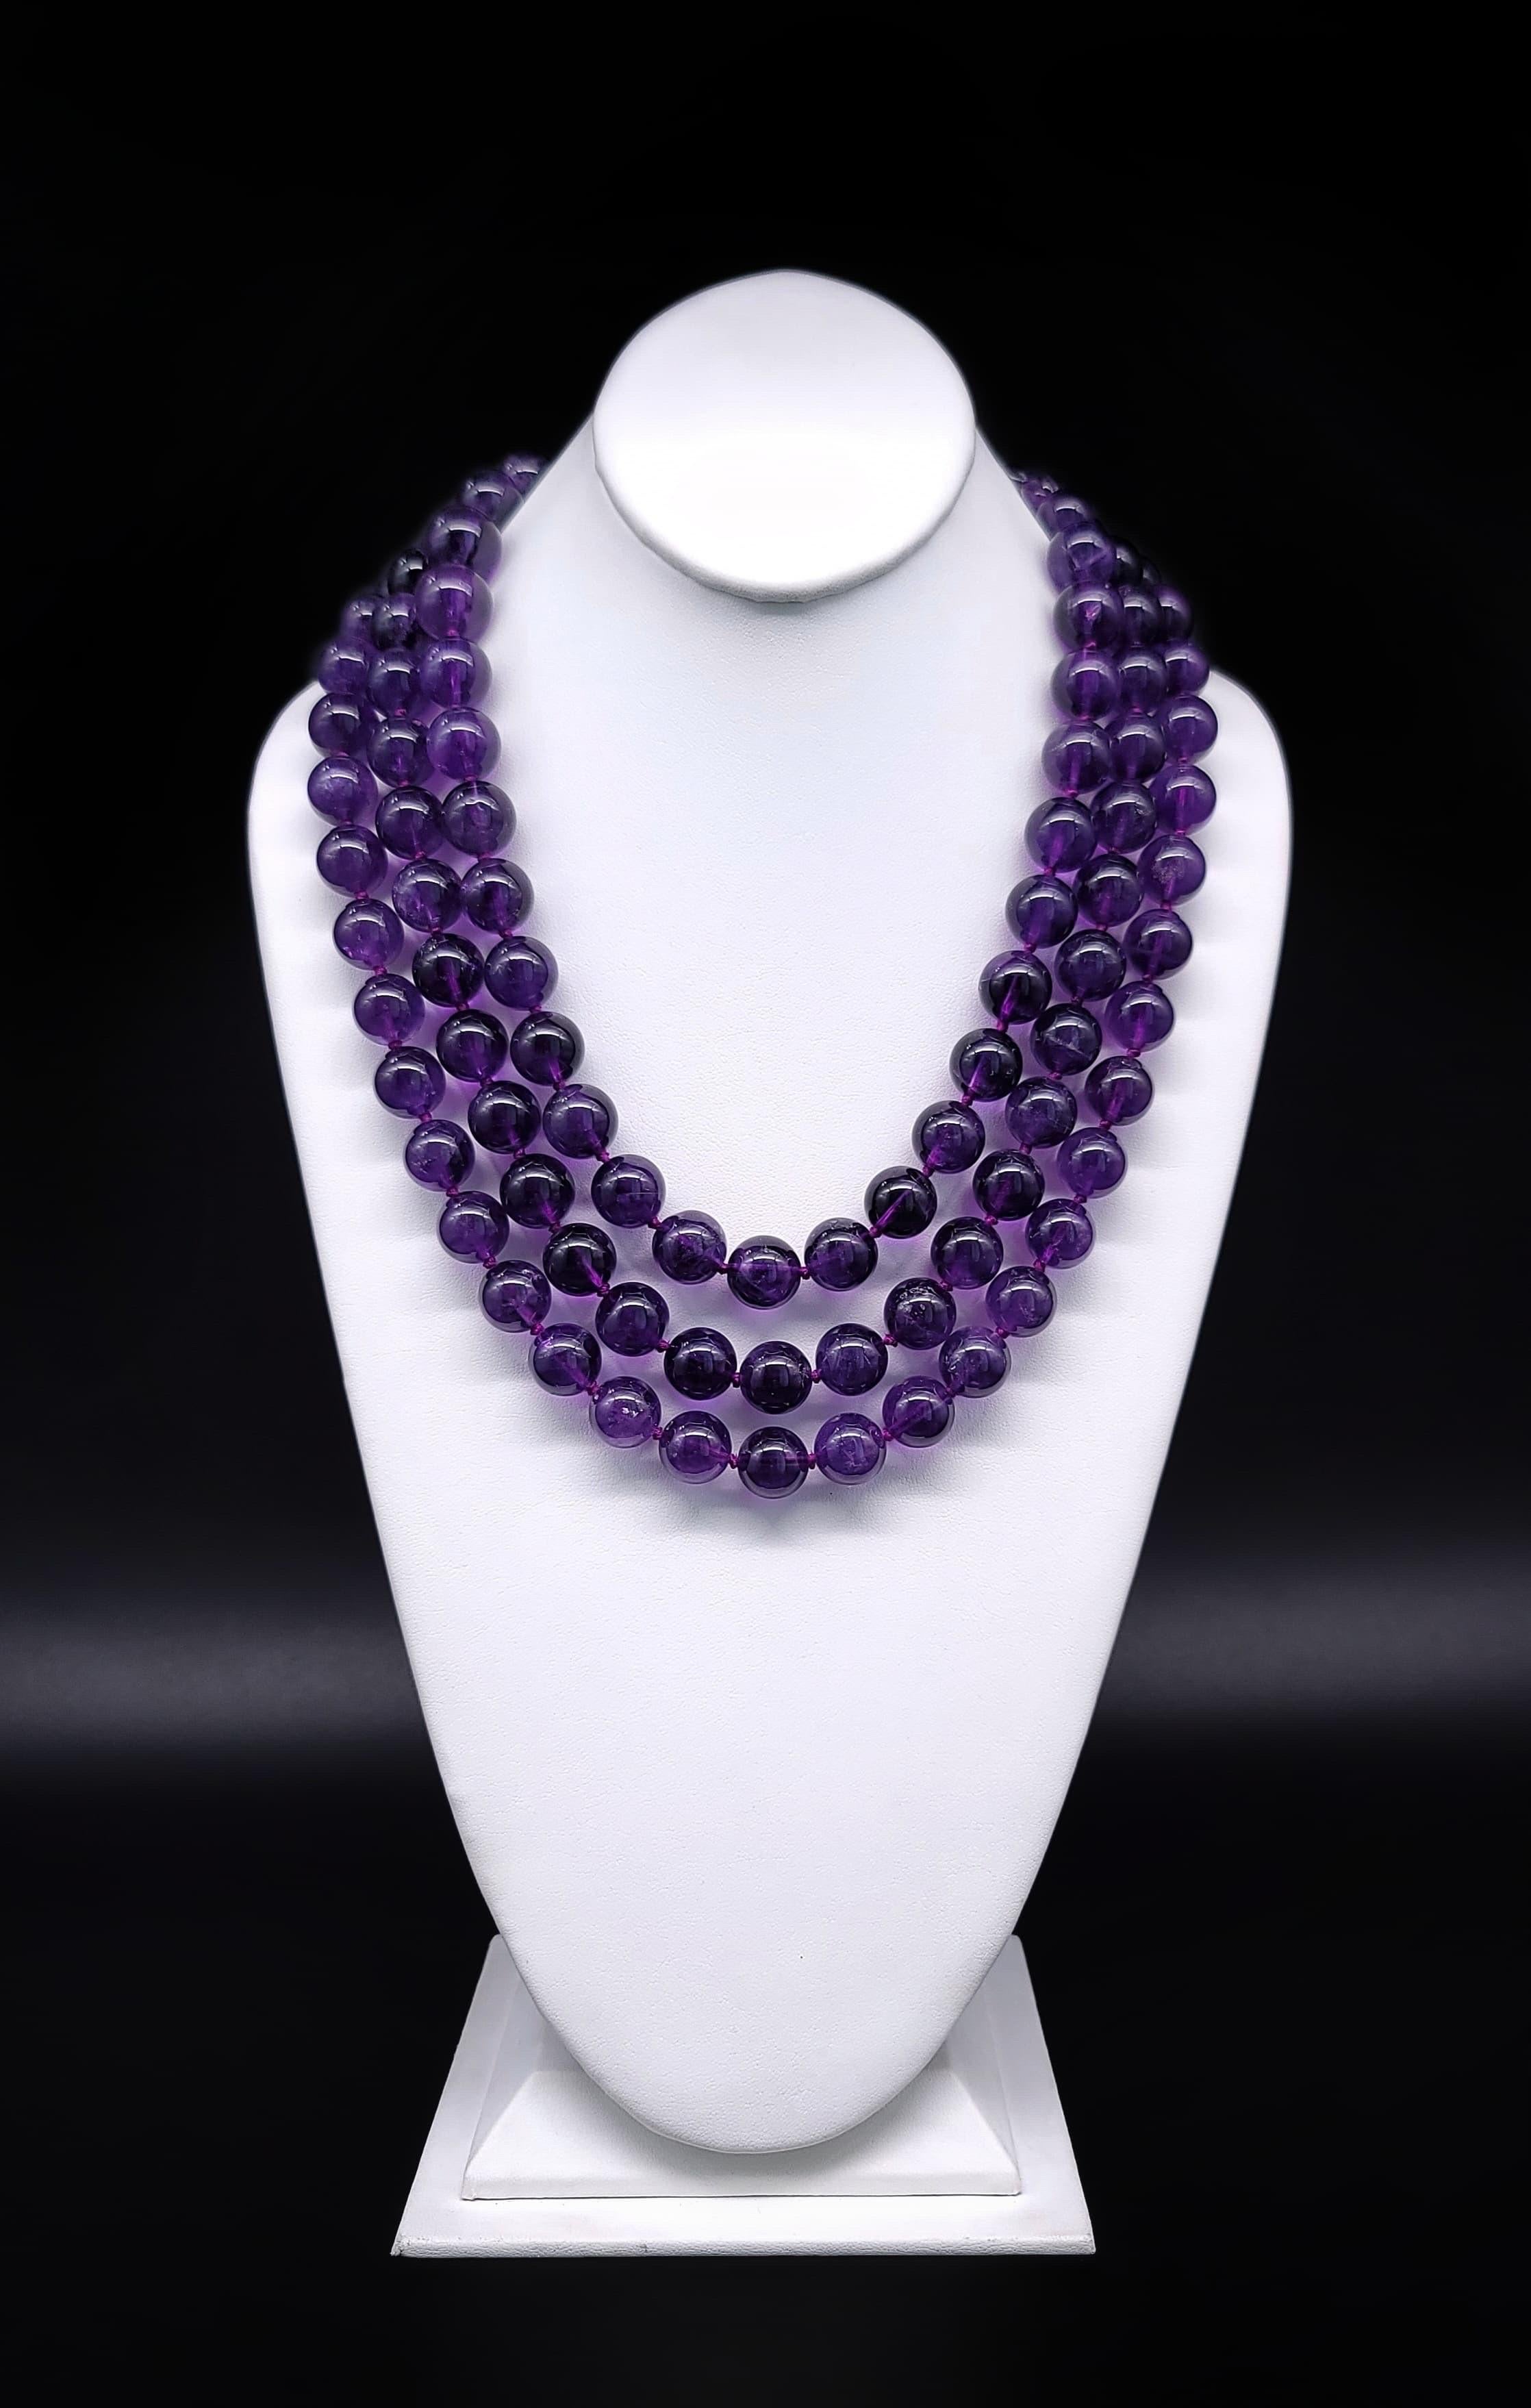 A.Jeschel  Amethyst necklace with a Vintage Venetian glass clasp. 10